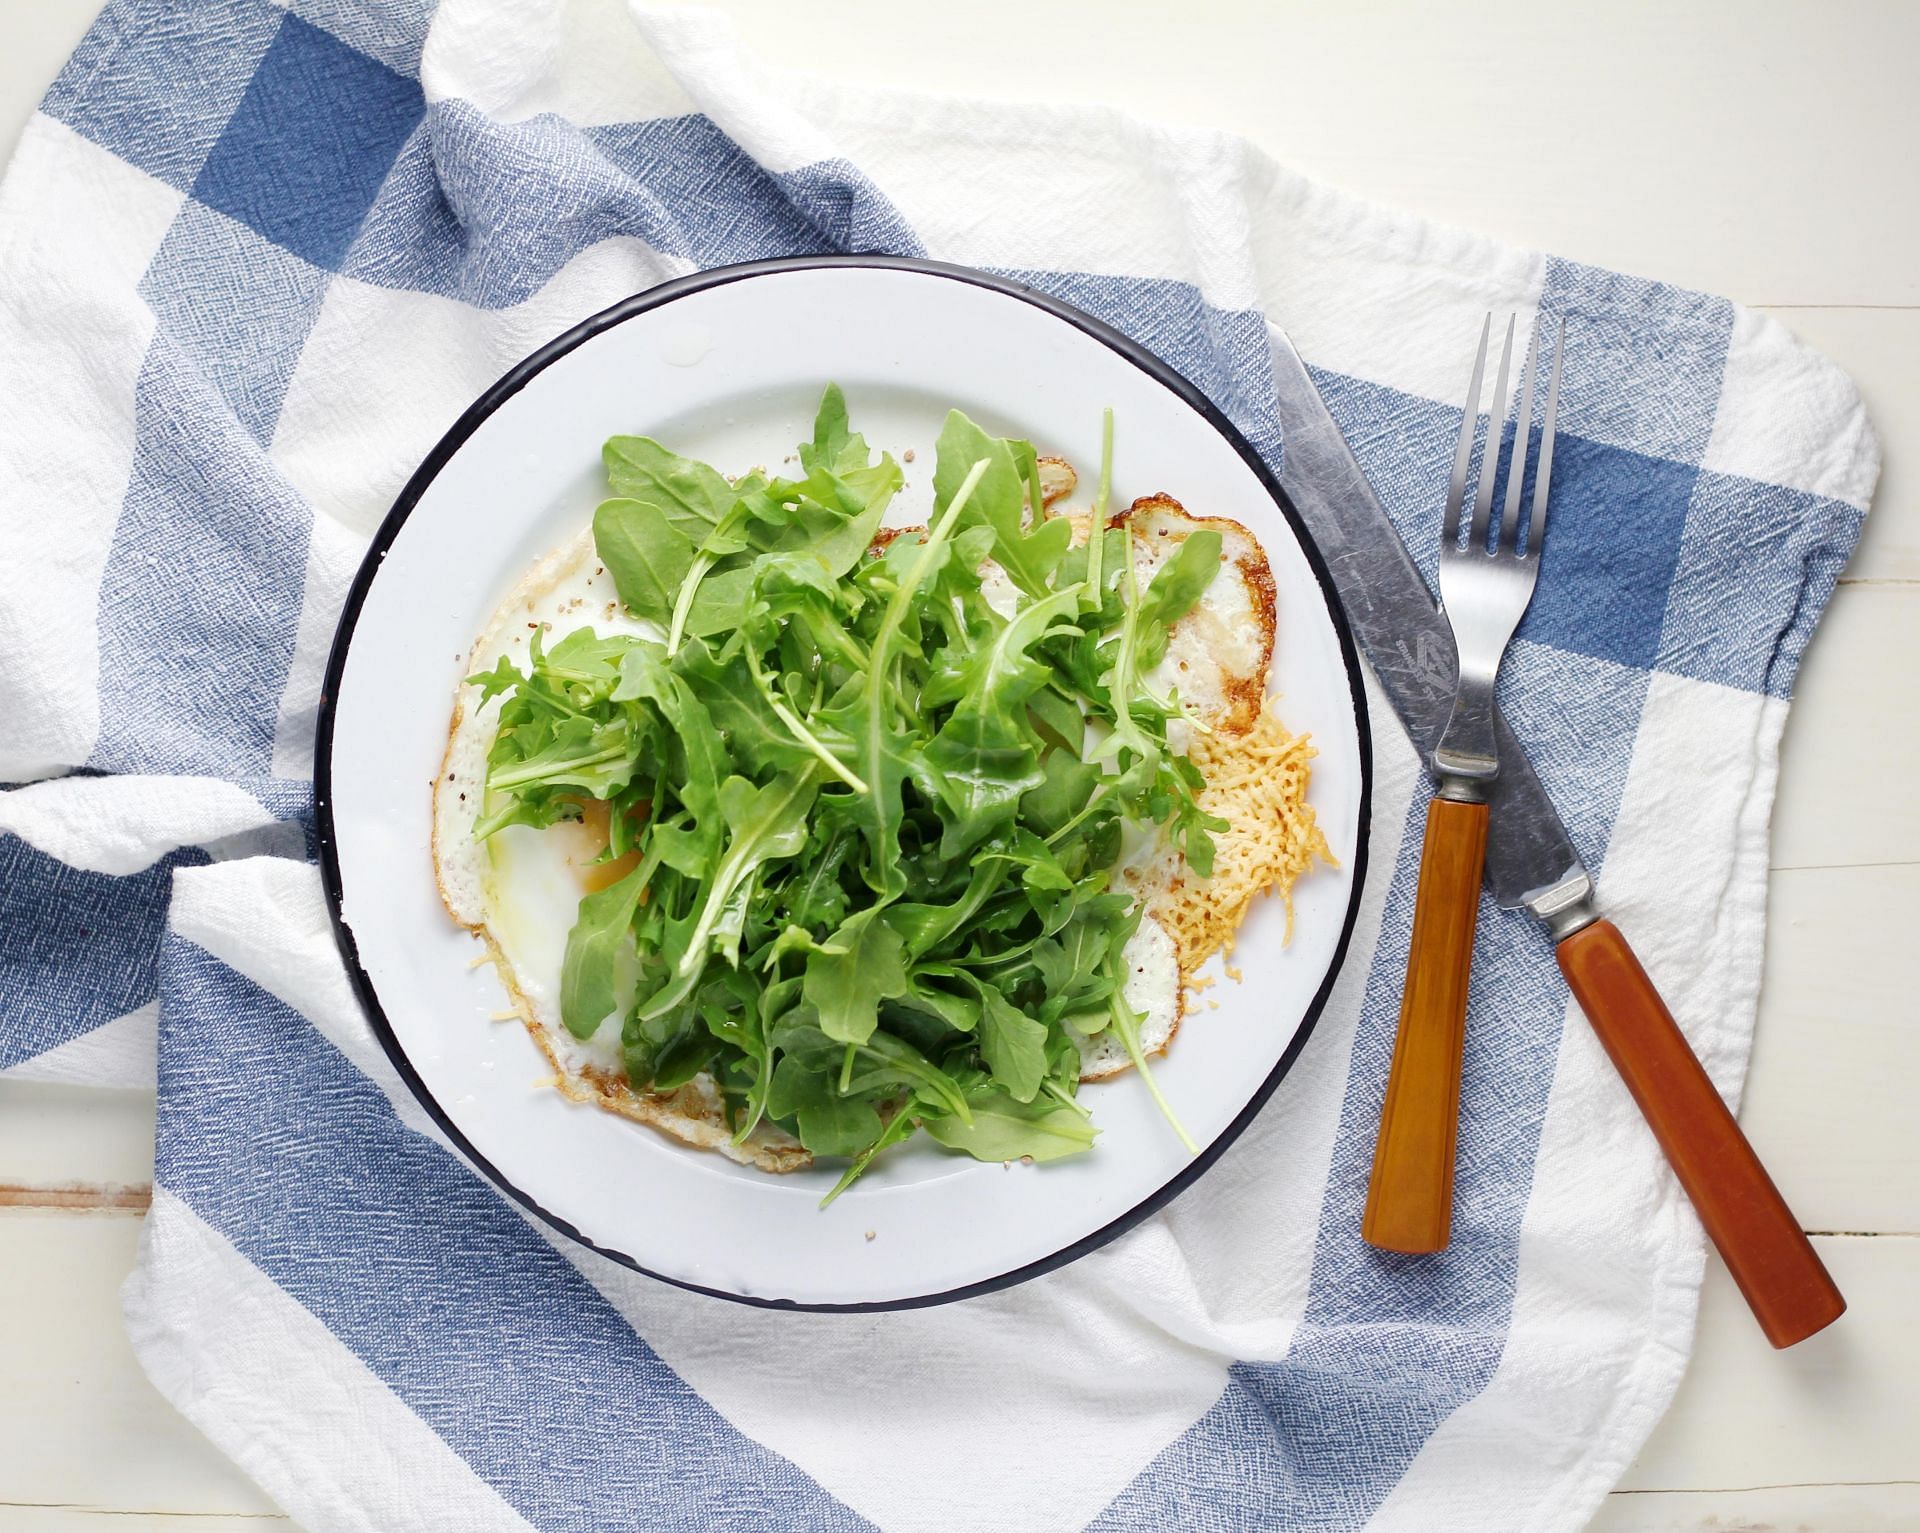 Nutrition in arugula: The flavor profile is not too strong. (Image via Unsplash / Sheri Silver)